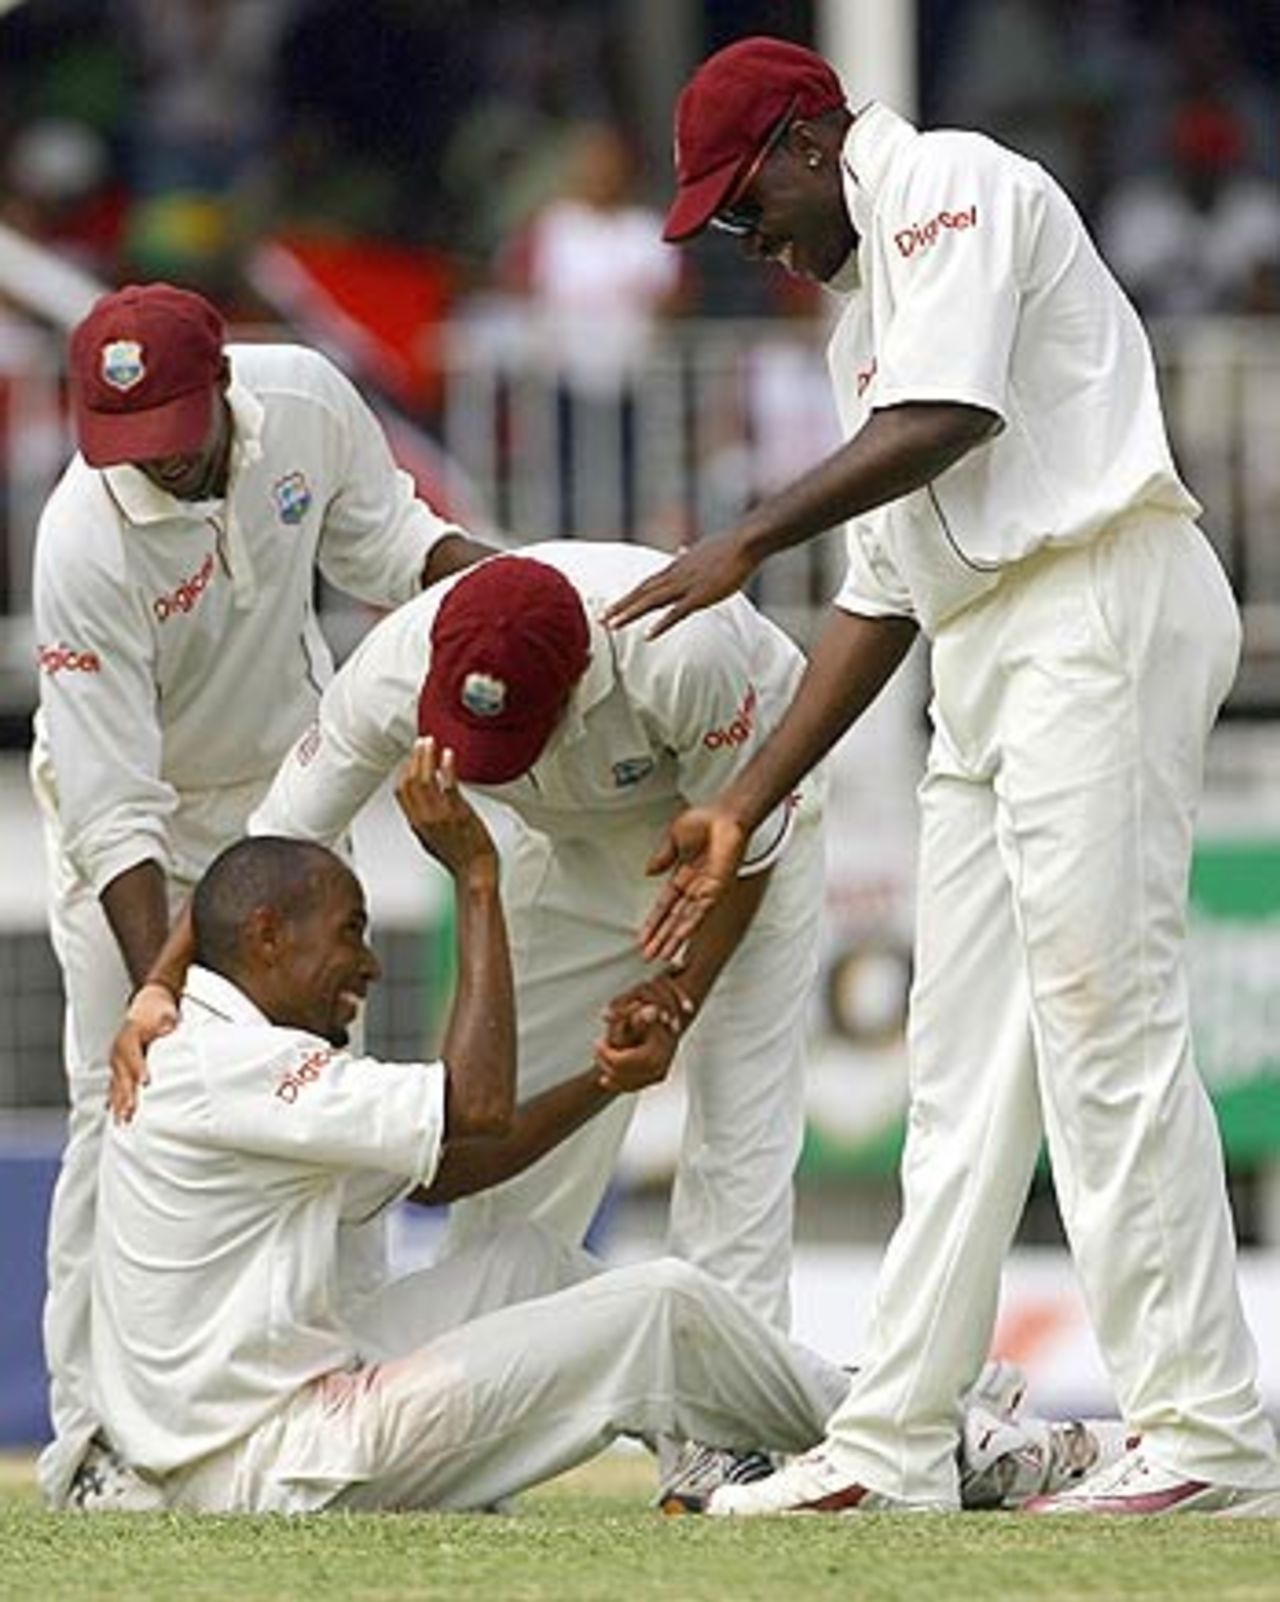 The West Indians congratulate Ian Bradshaw after Wasim Jaffer's wicket, West Indies v India, 1st Test, Antigua, 4th day, June 5, 2006